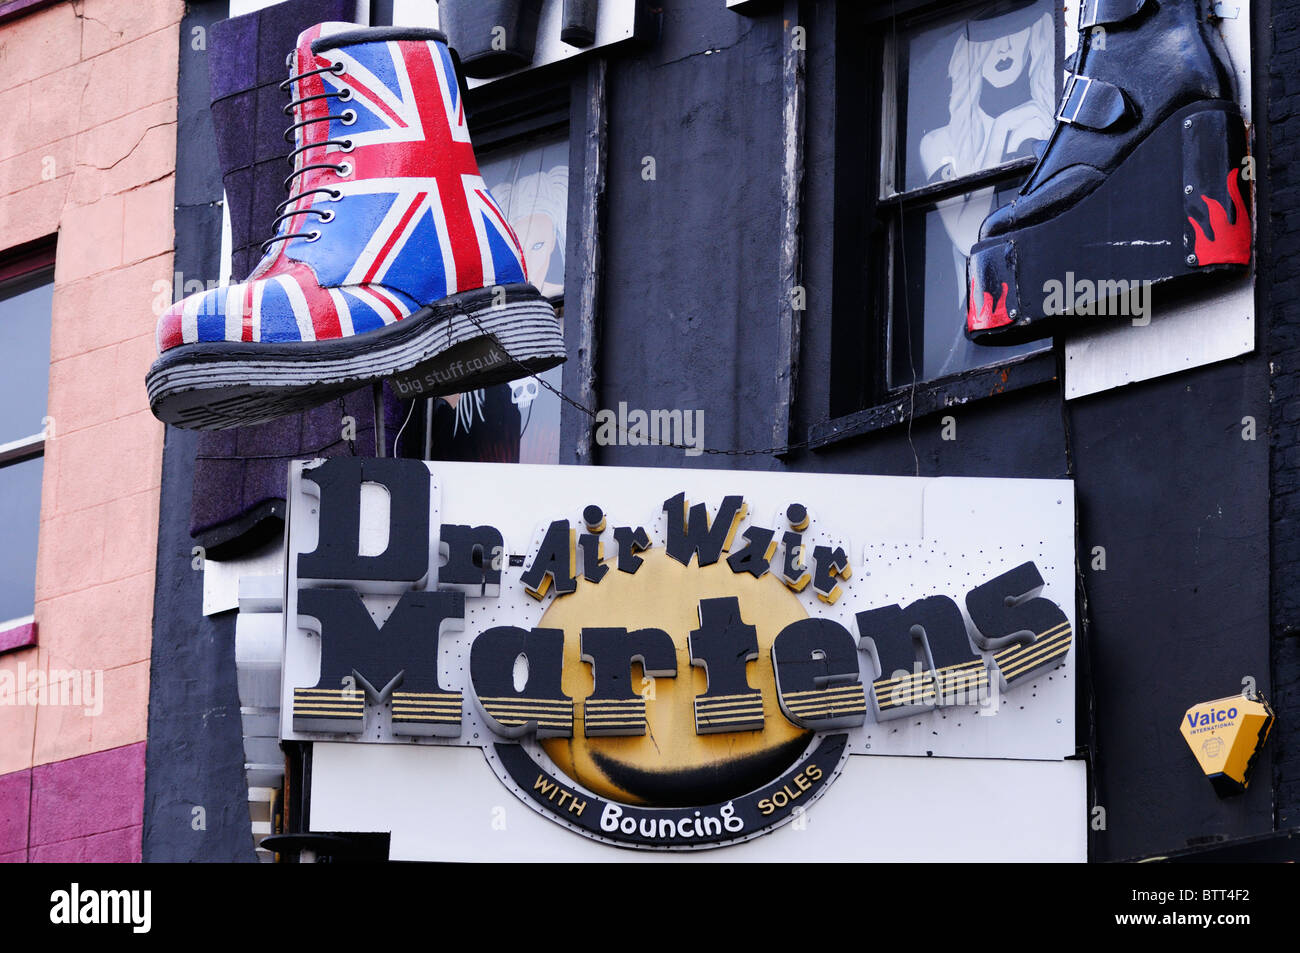 Dr martens camden hi-res stock photography and images - Alamy